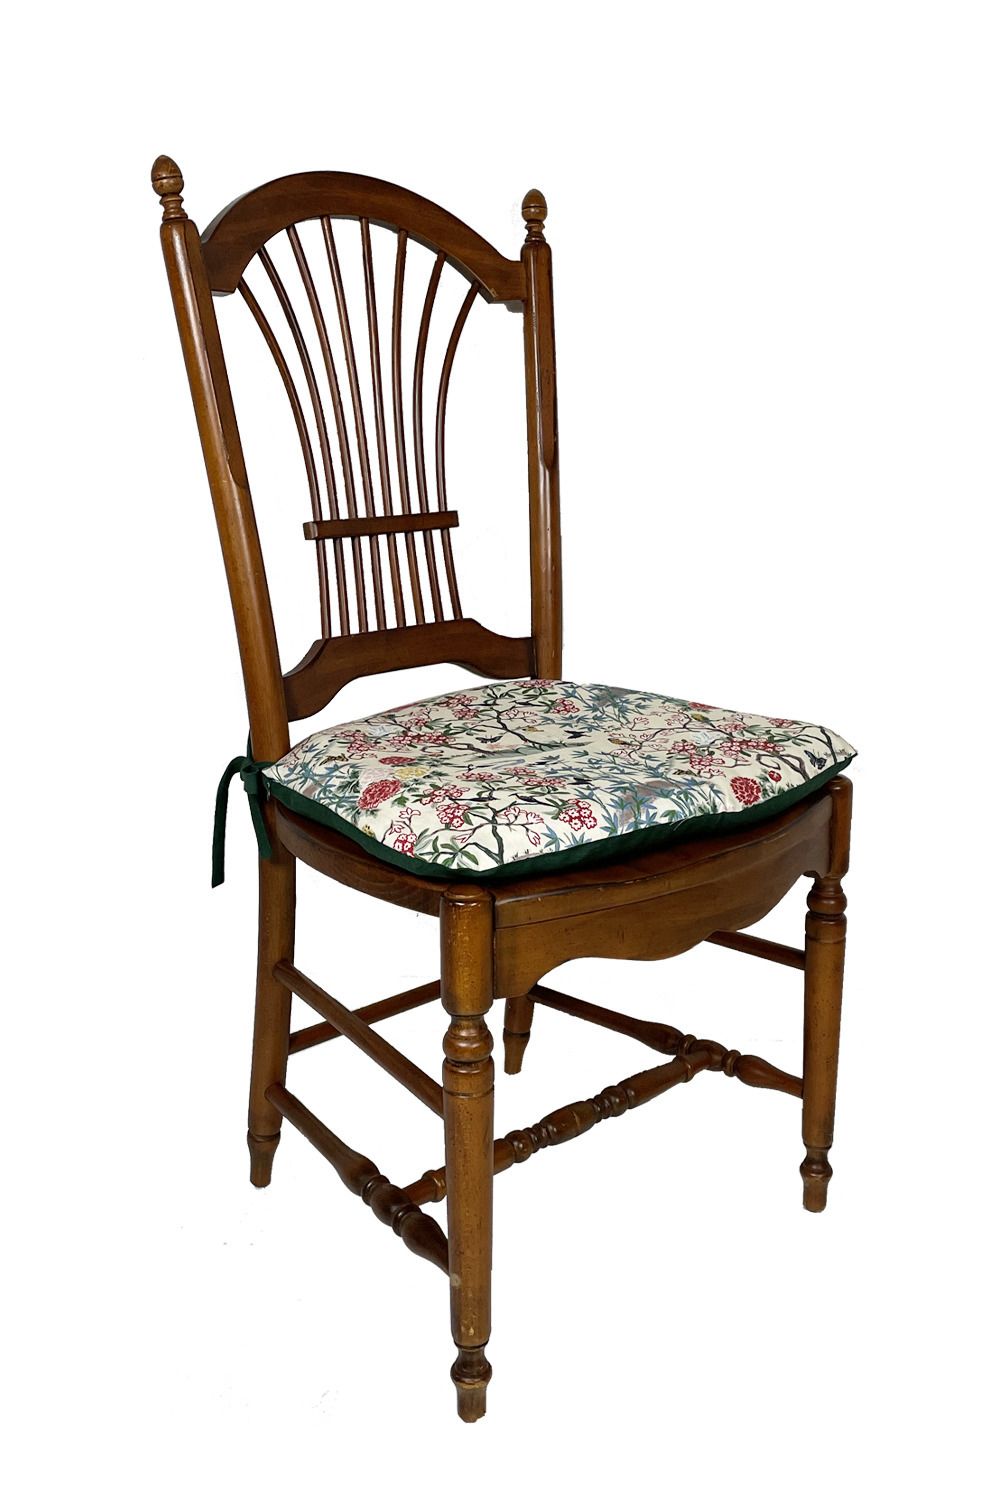 Oriental Wall Vintage dining chair 詳細画像 グリーン